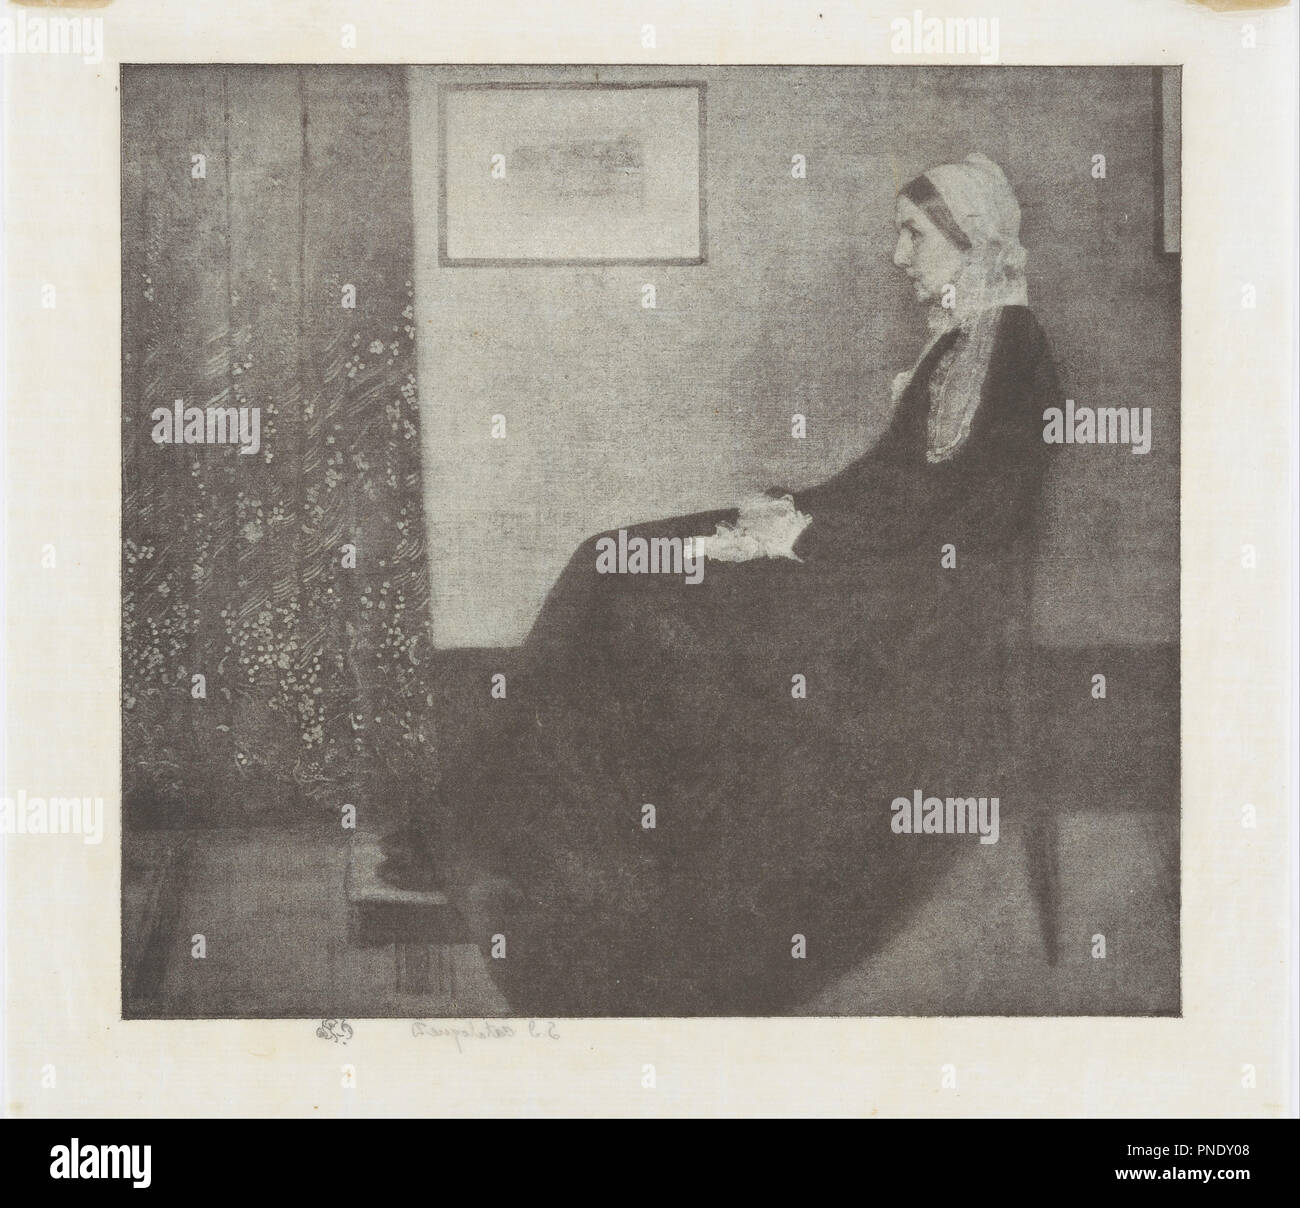 Photomechanical reproduction in halftone, after Whistler's portrait of his mother, 'Arrangement in Grey and Black No. I'. Date/Period: By 1893. Print. Halftone print on paper. Height: 155 mm (6.10 in); Width: 173 mm (6.81 in). Author: WHISTLER, JAMES ABBOTT MCNEILL. Stock Photo